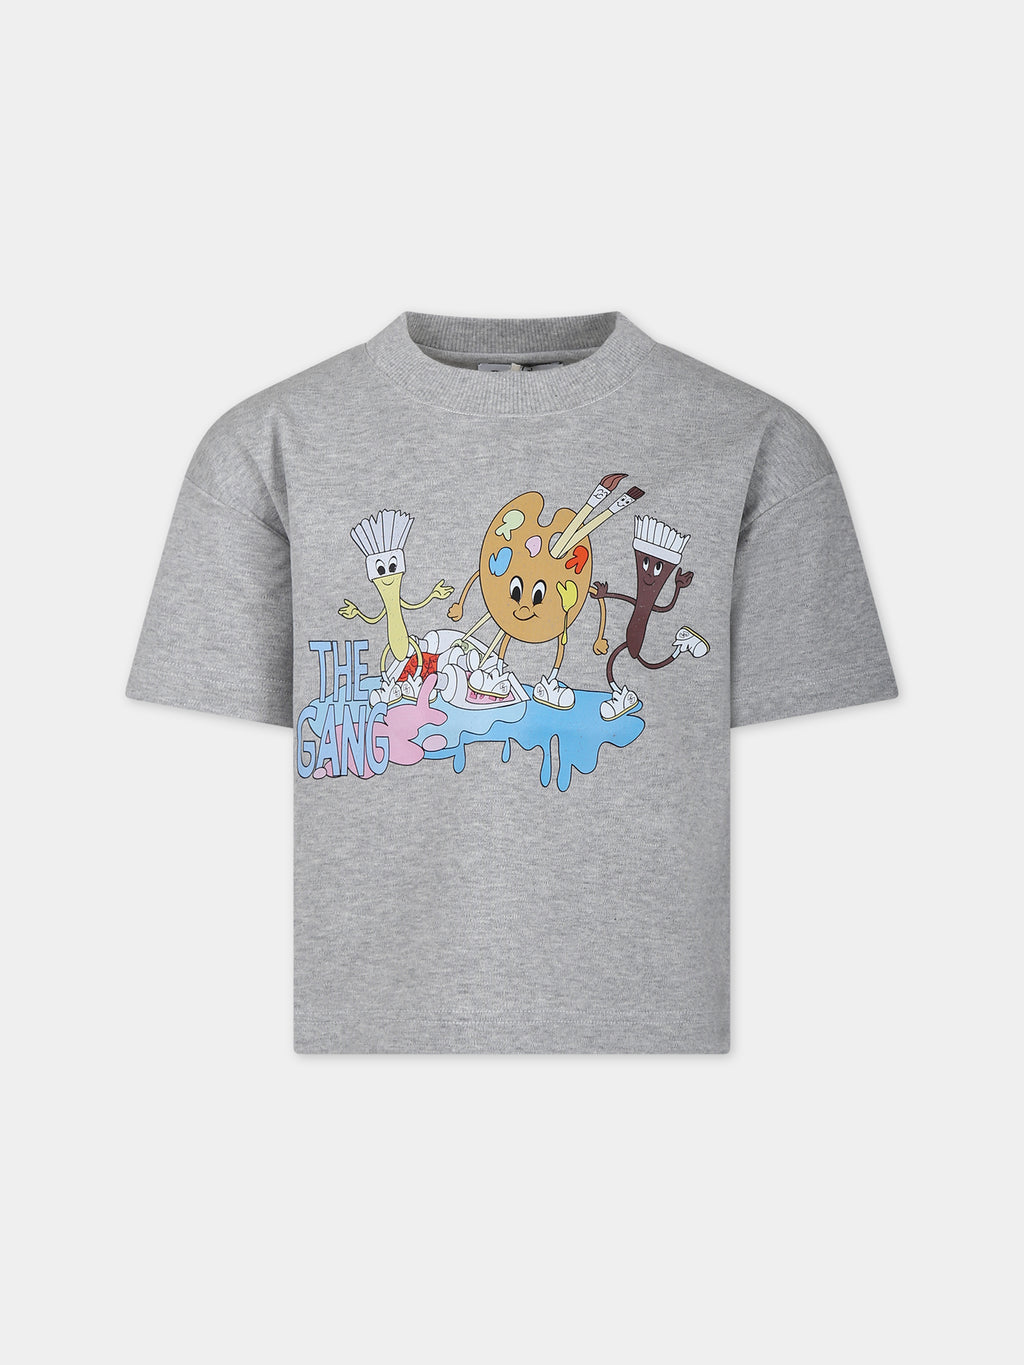 Gray t-shirt for kids with print